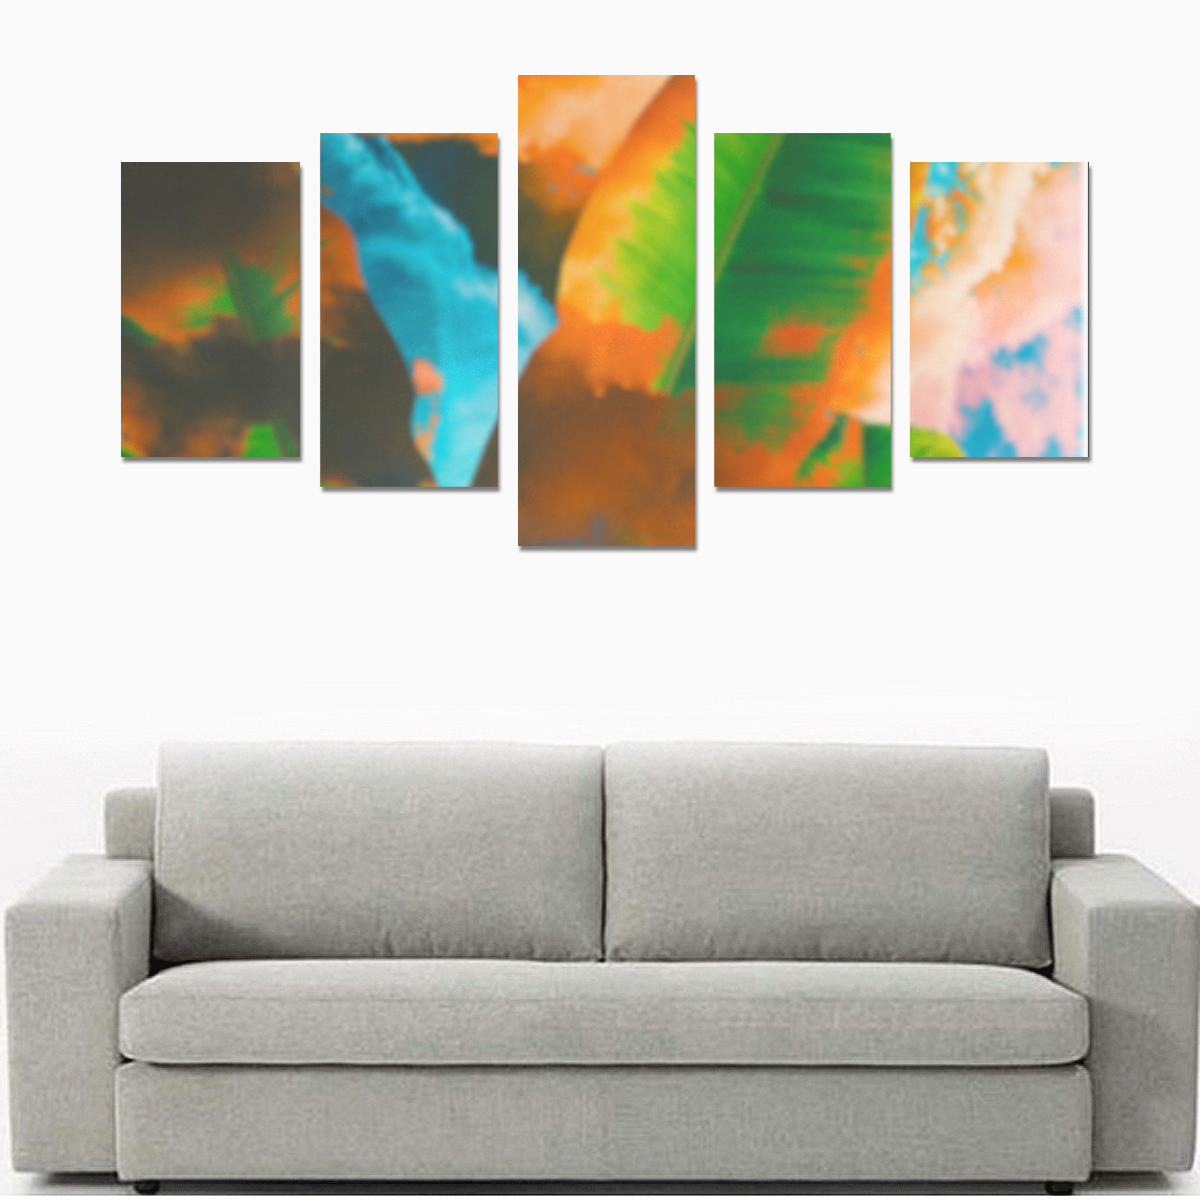 Painted leafs Canvas Print Sets C (No Frame)